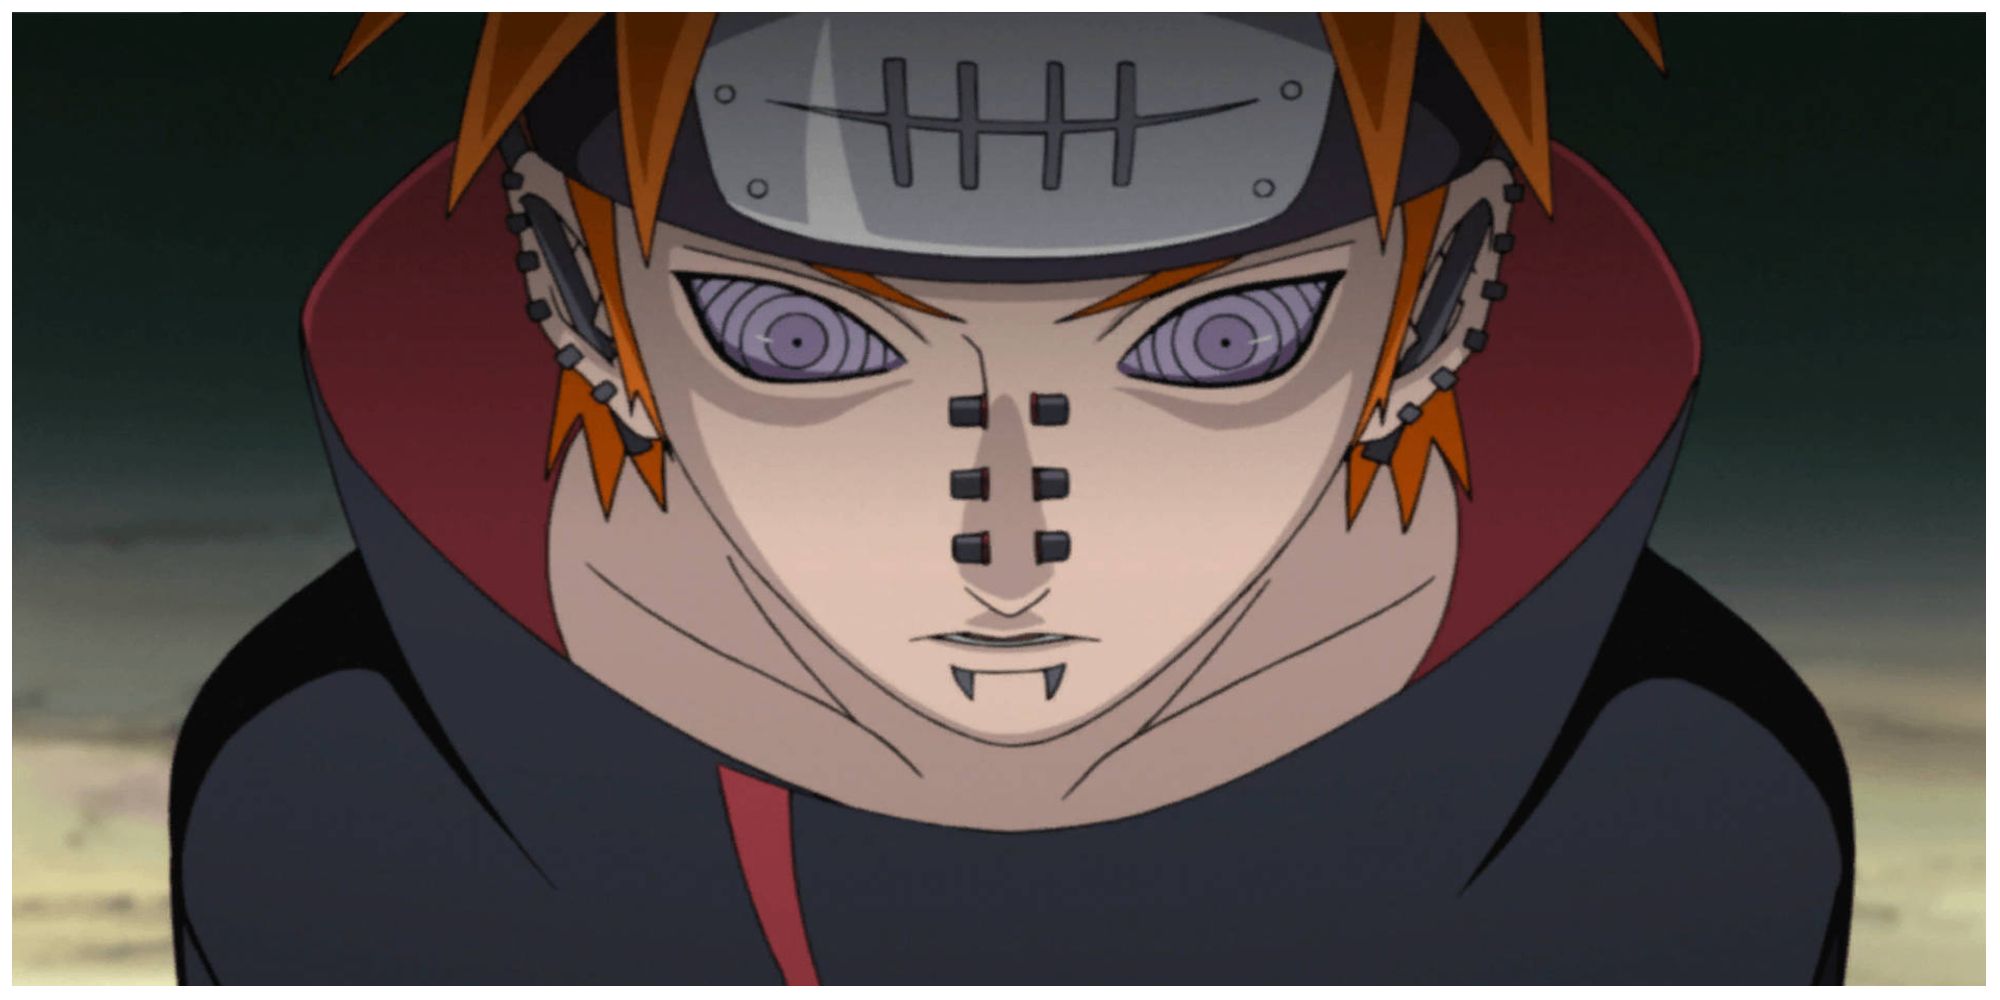 Pain from Naruto looking angry from an upward angle.